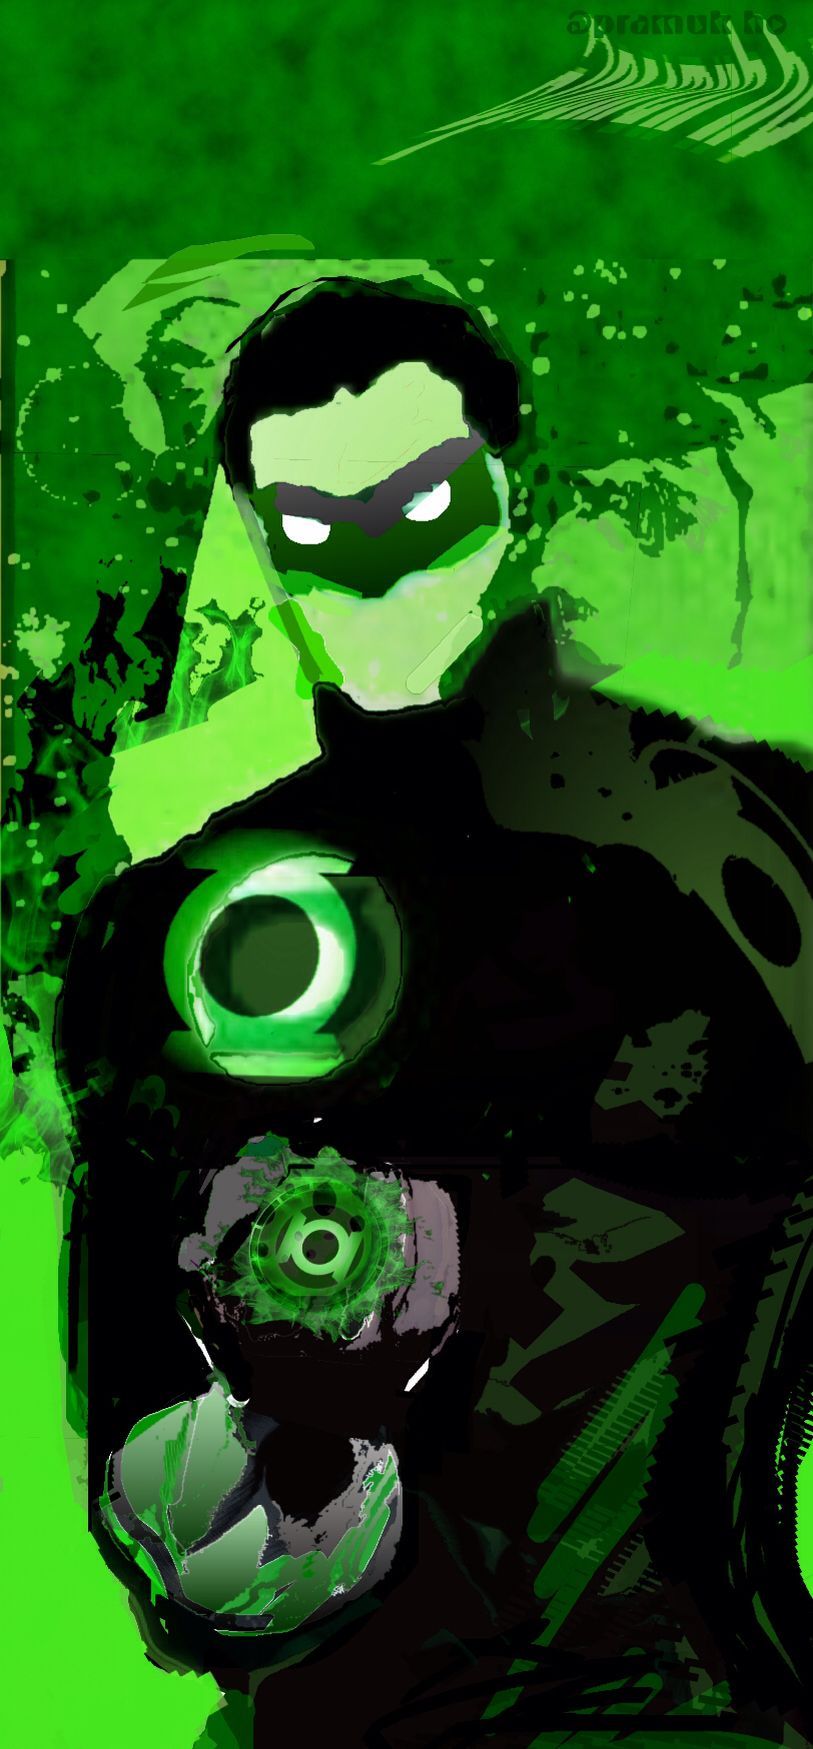 The Power Ring derived from Power Ring in Green Lantern